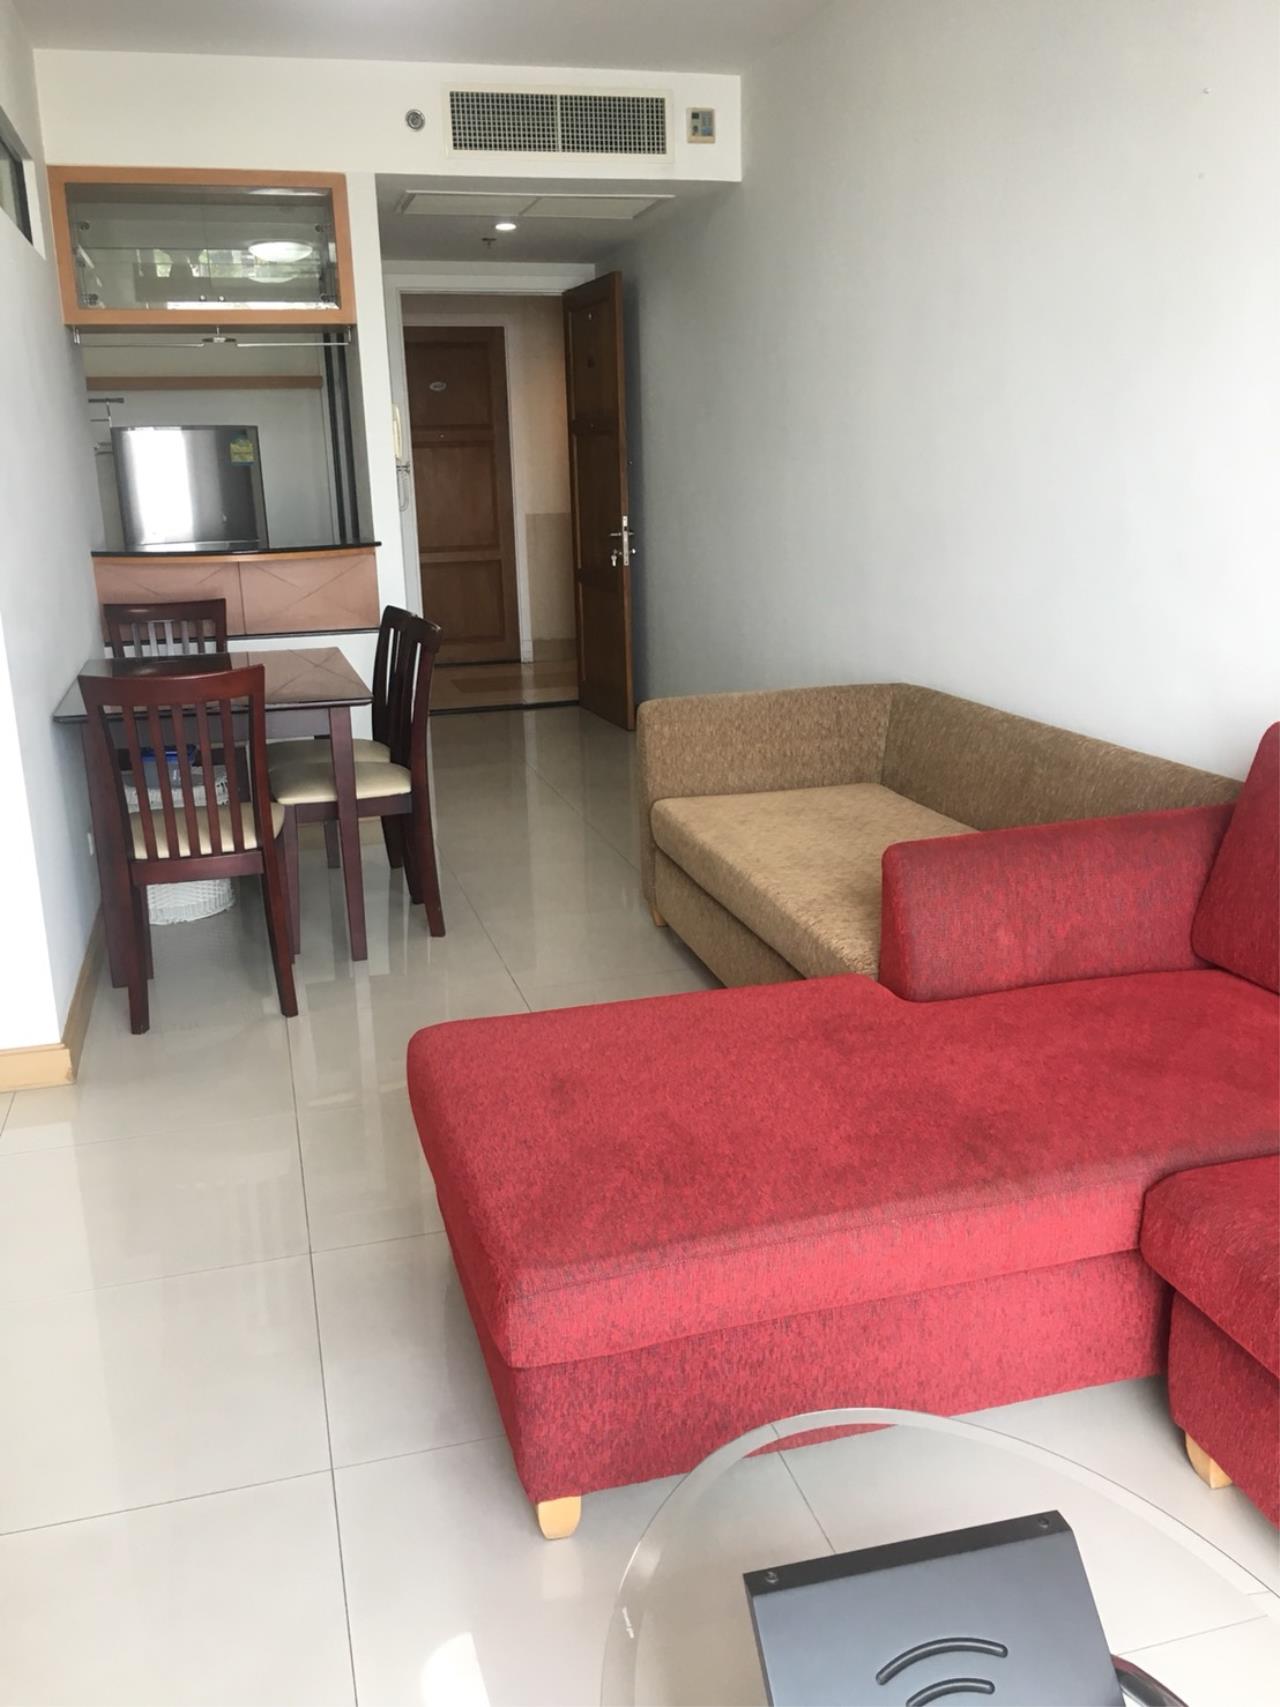 Quality Life Property Agency's 2 Bed For Rent At Supalai Premier Asoke, Modern And Nice Decorated Room On High Floor 20 16